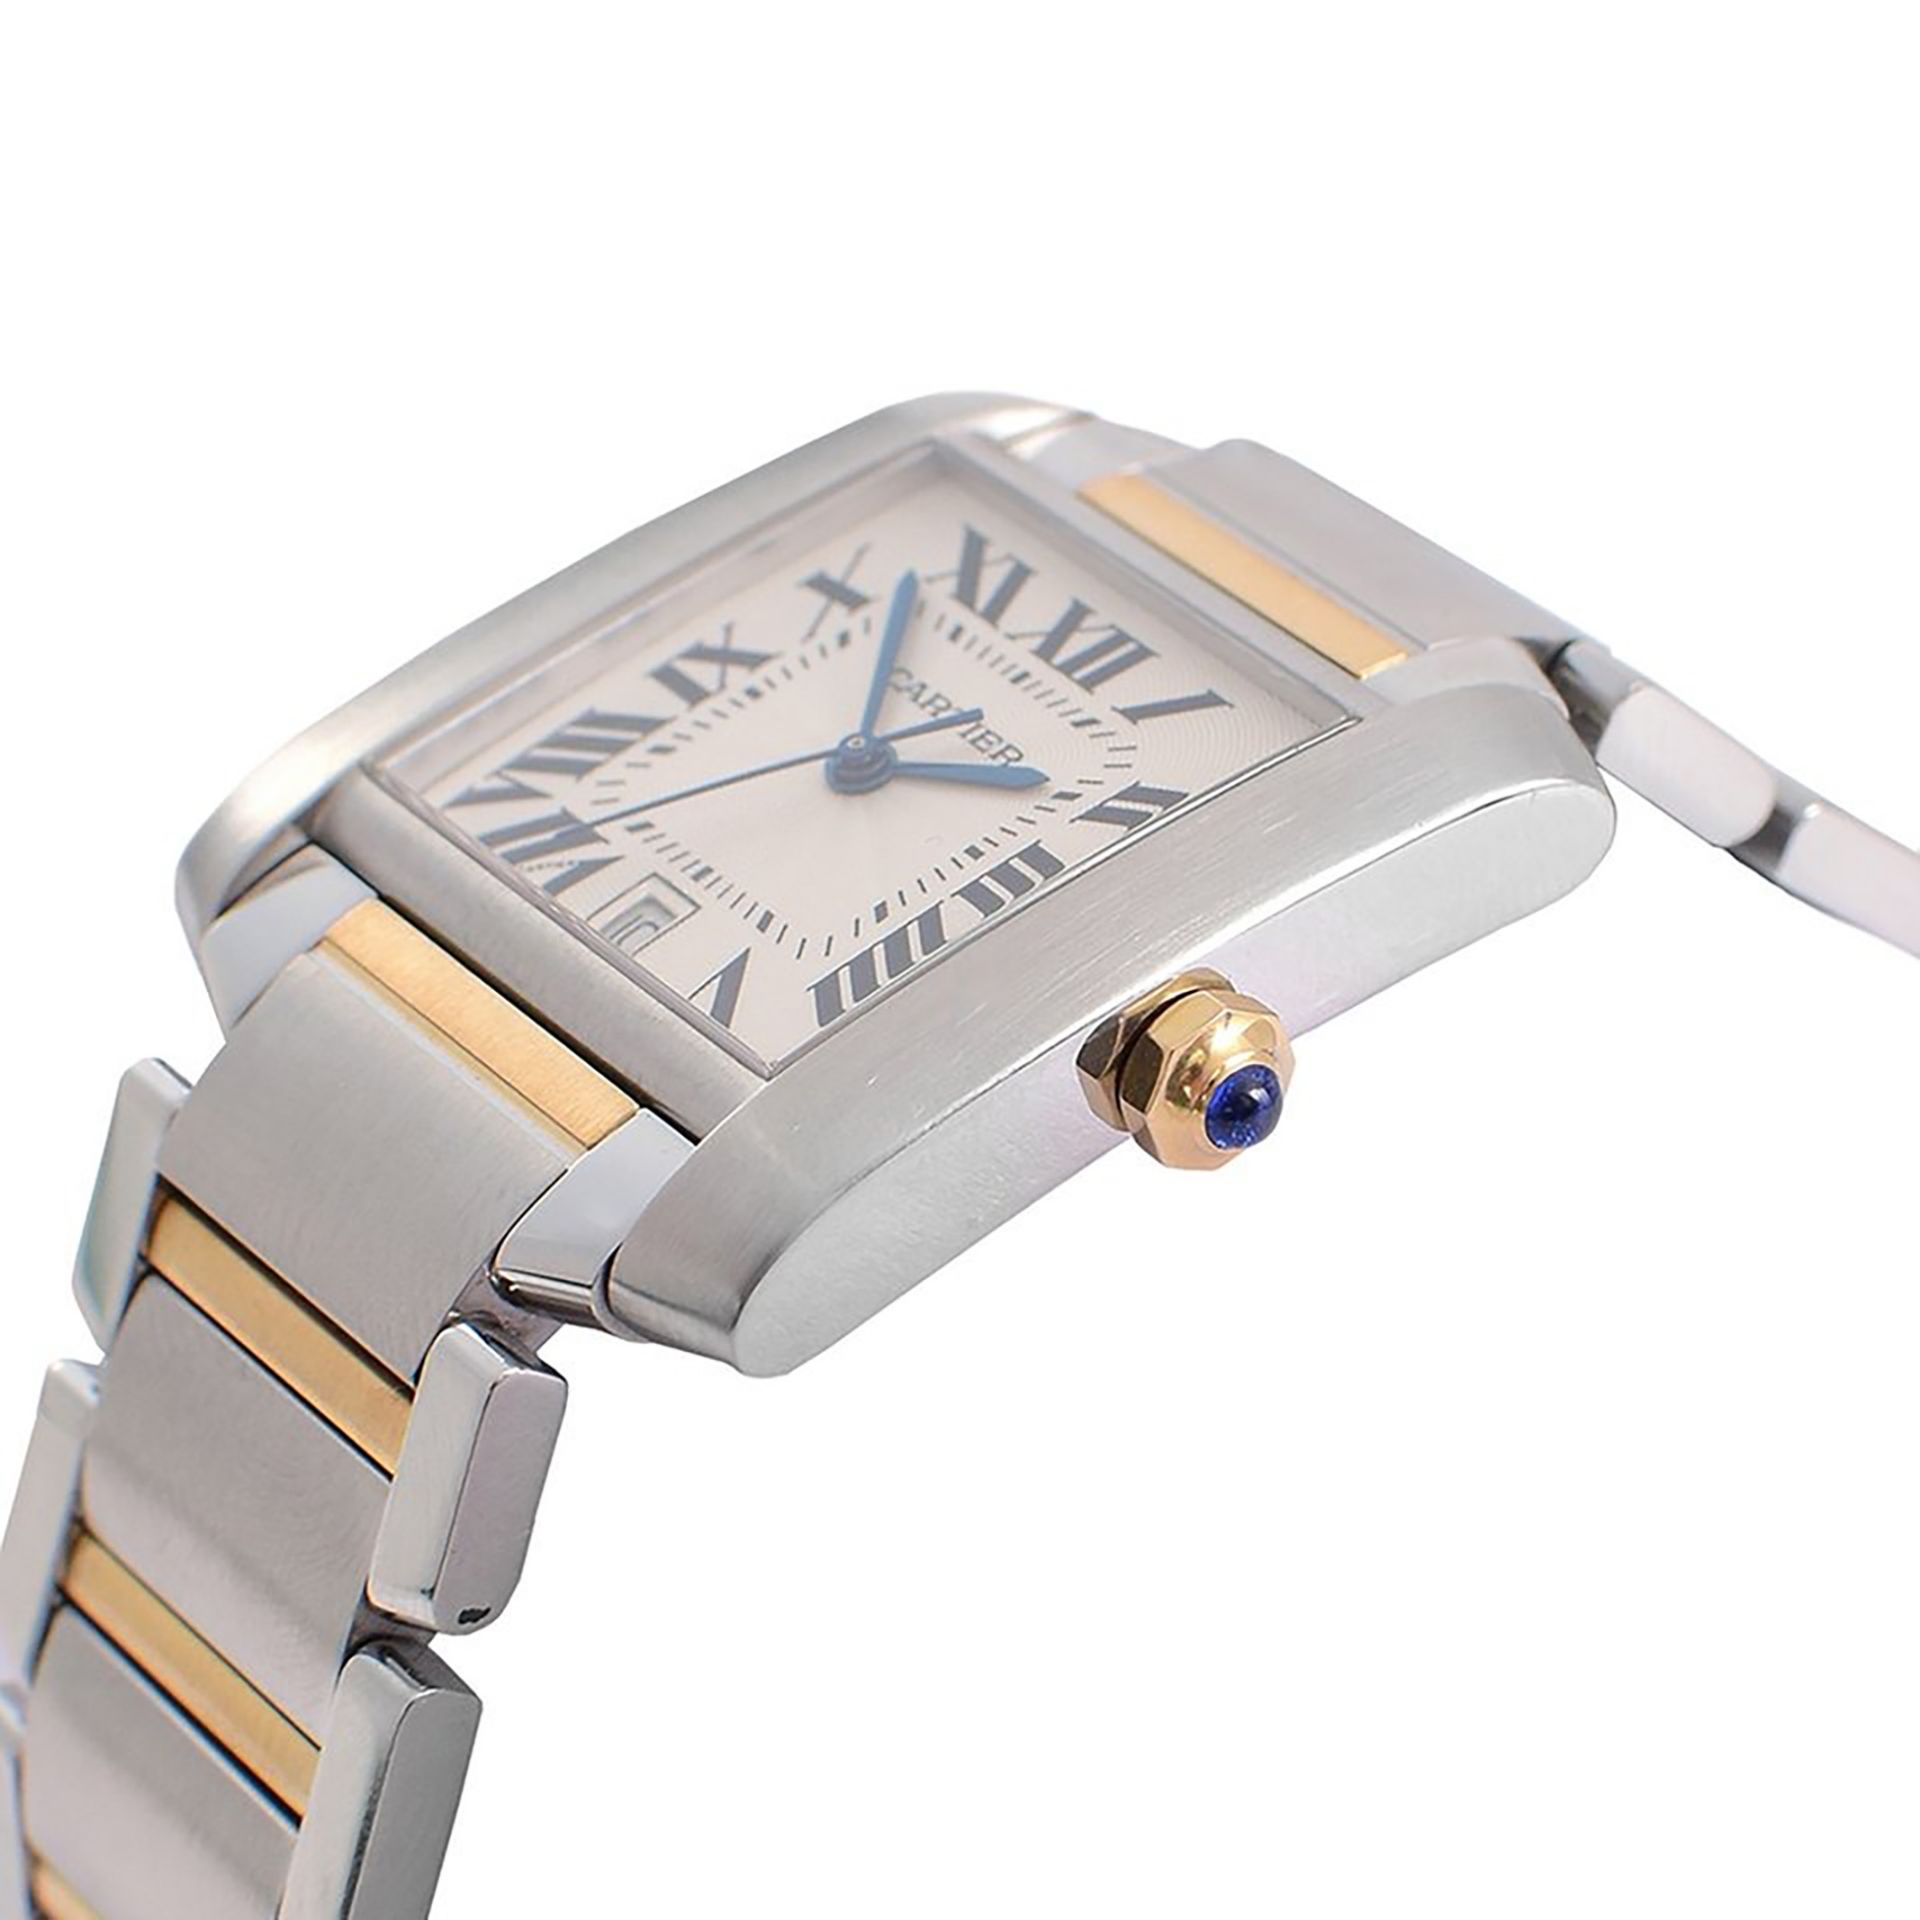 Cartier Cadete Unisex wristwatch in steel and gold Tank Française model in steel and 18k gold - Image 3 of 3